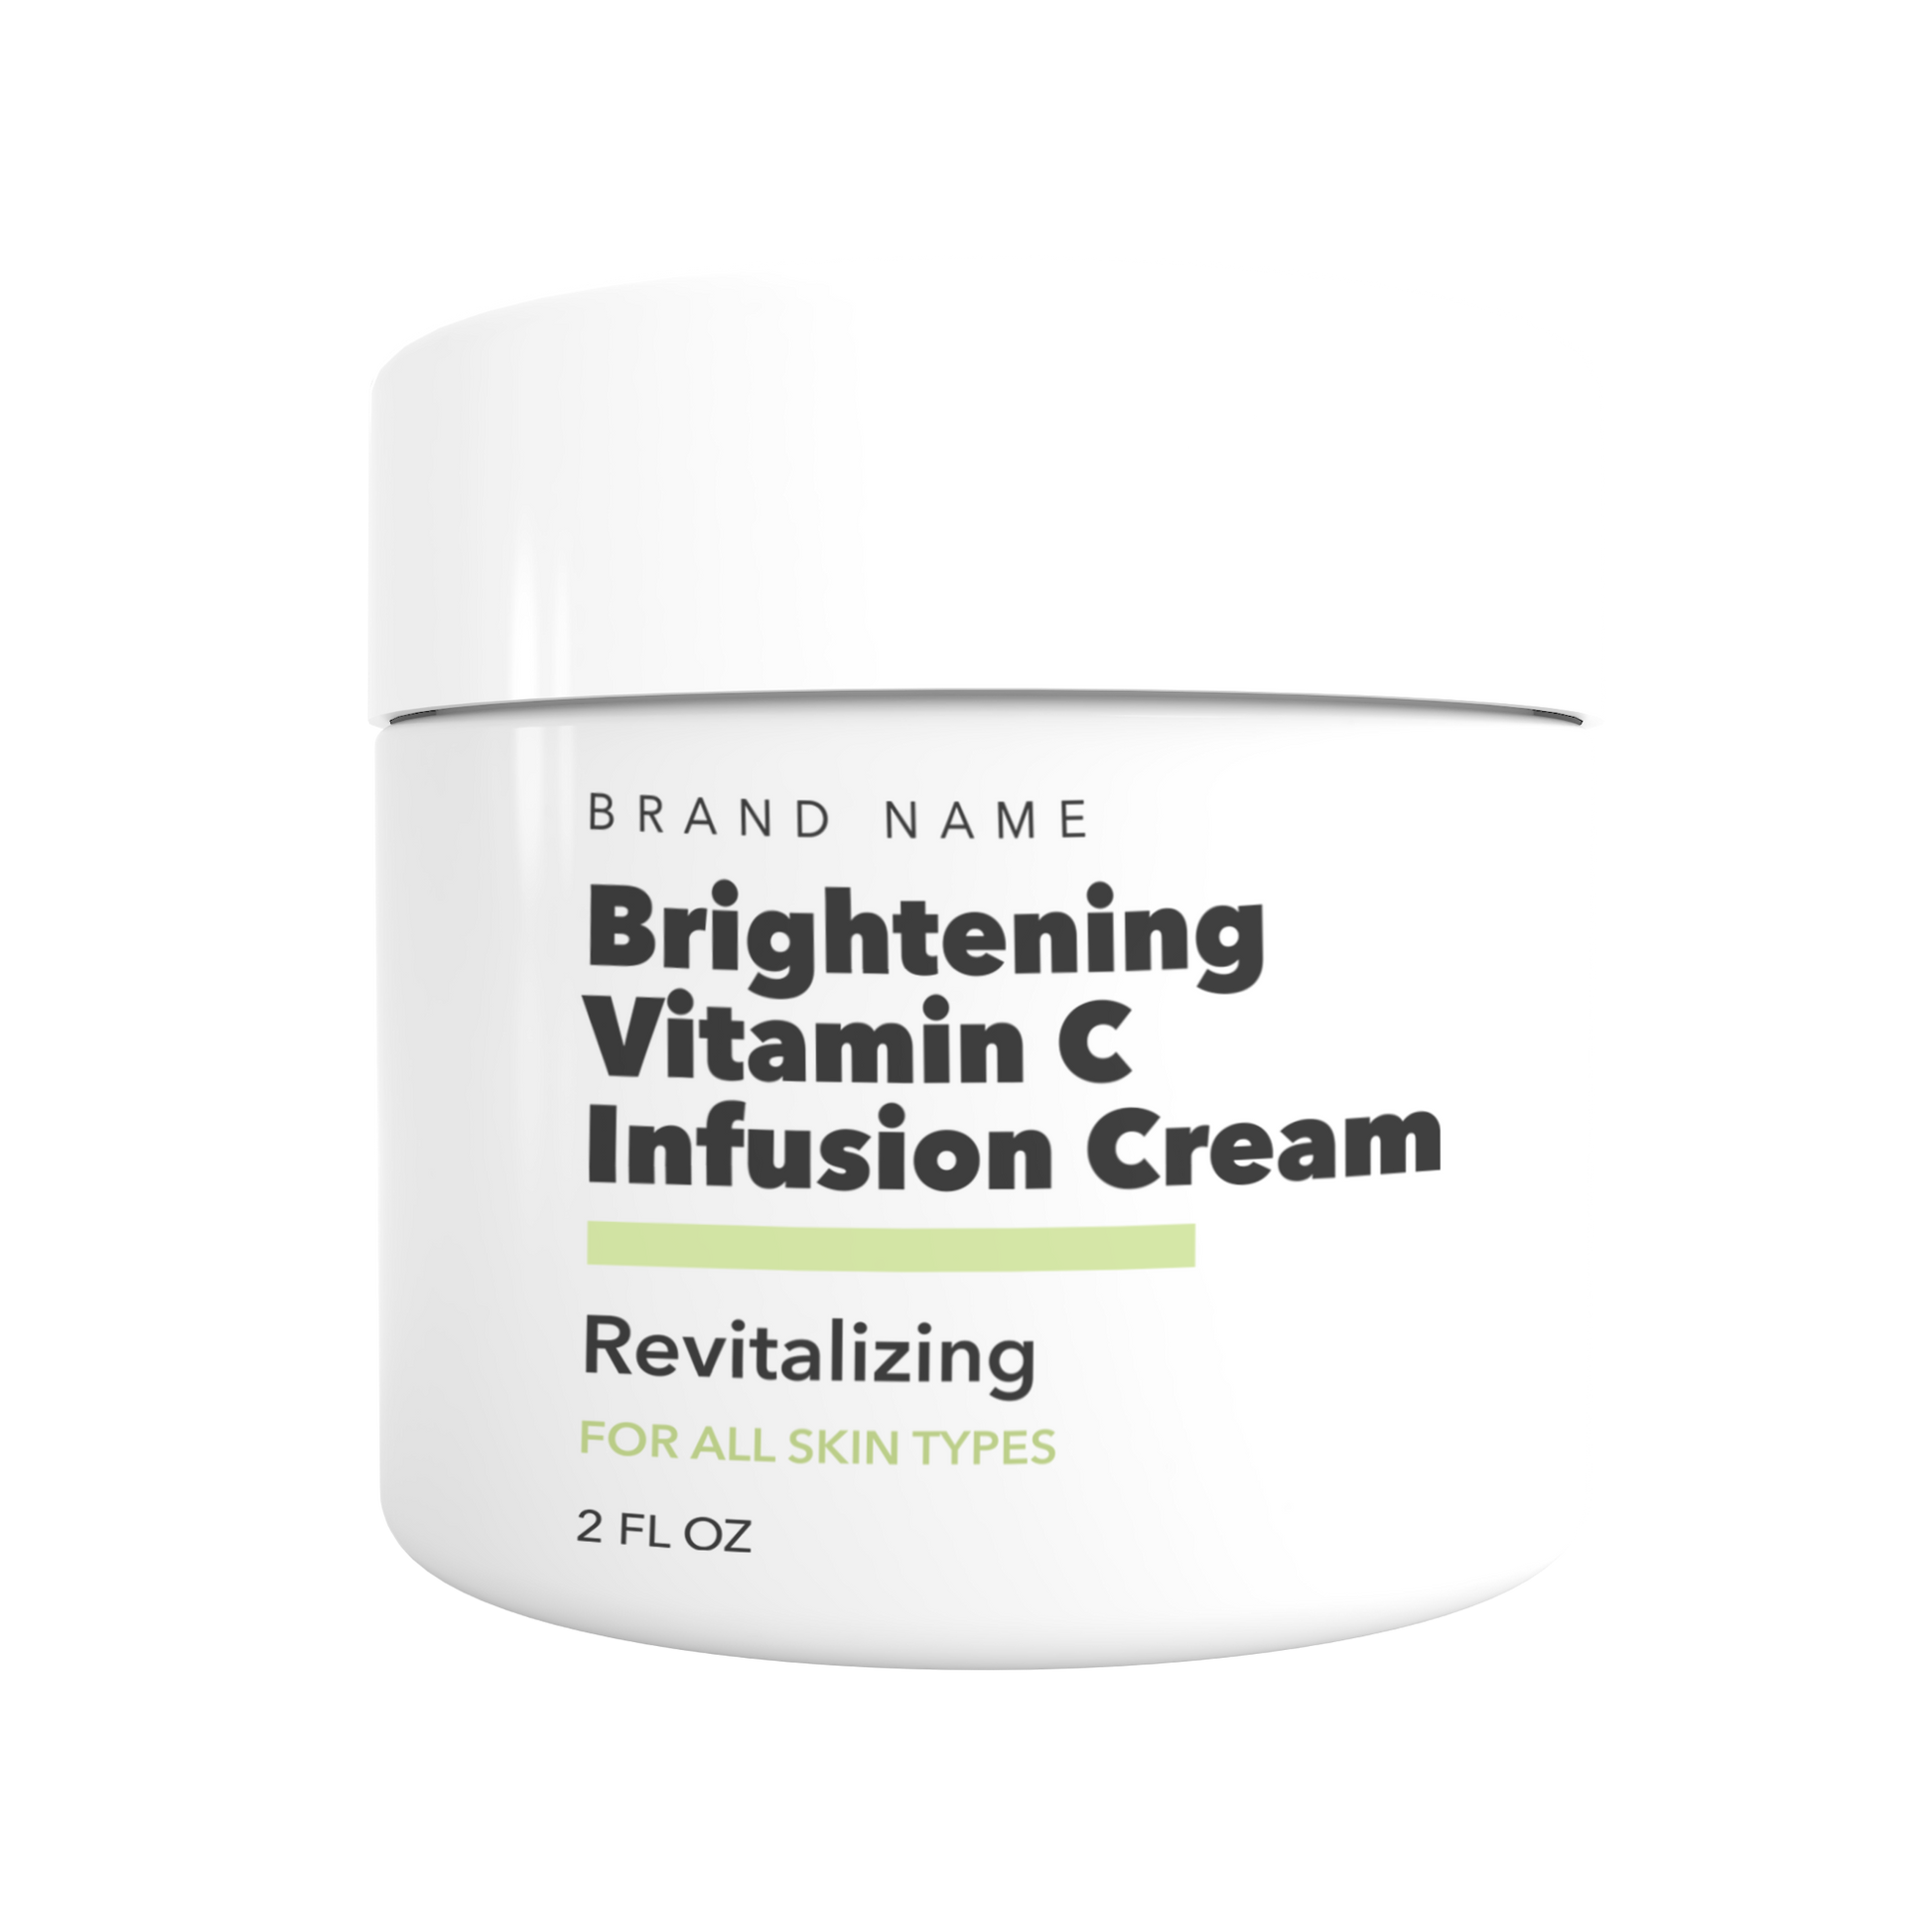 Brightening Vitamin C Infusion Cream Private Label Skincare Manufacturing, Start your own skincare brand today